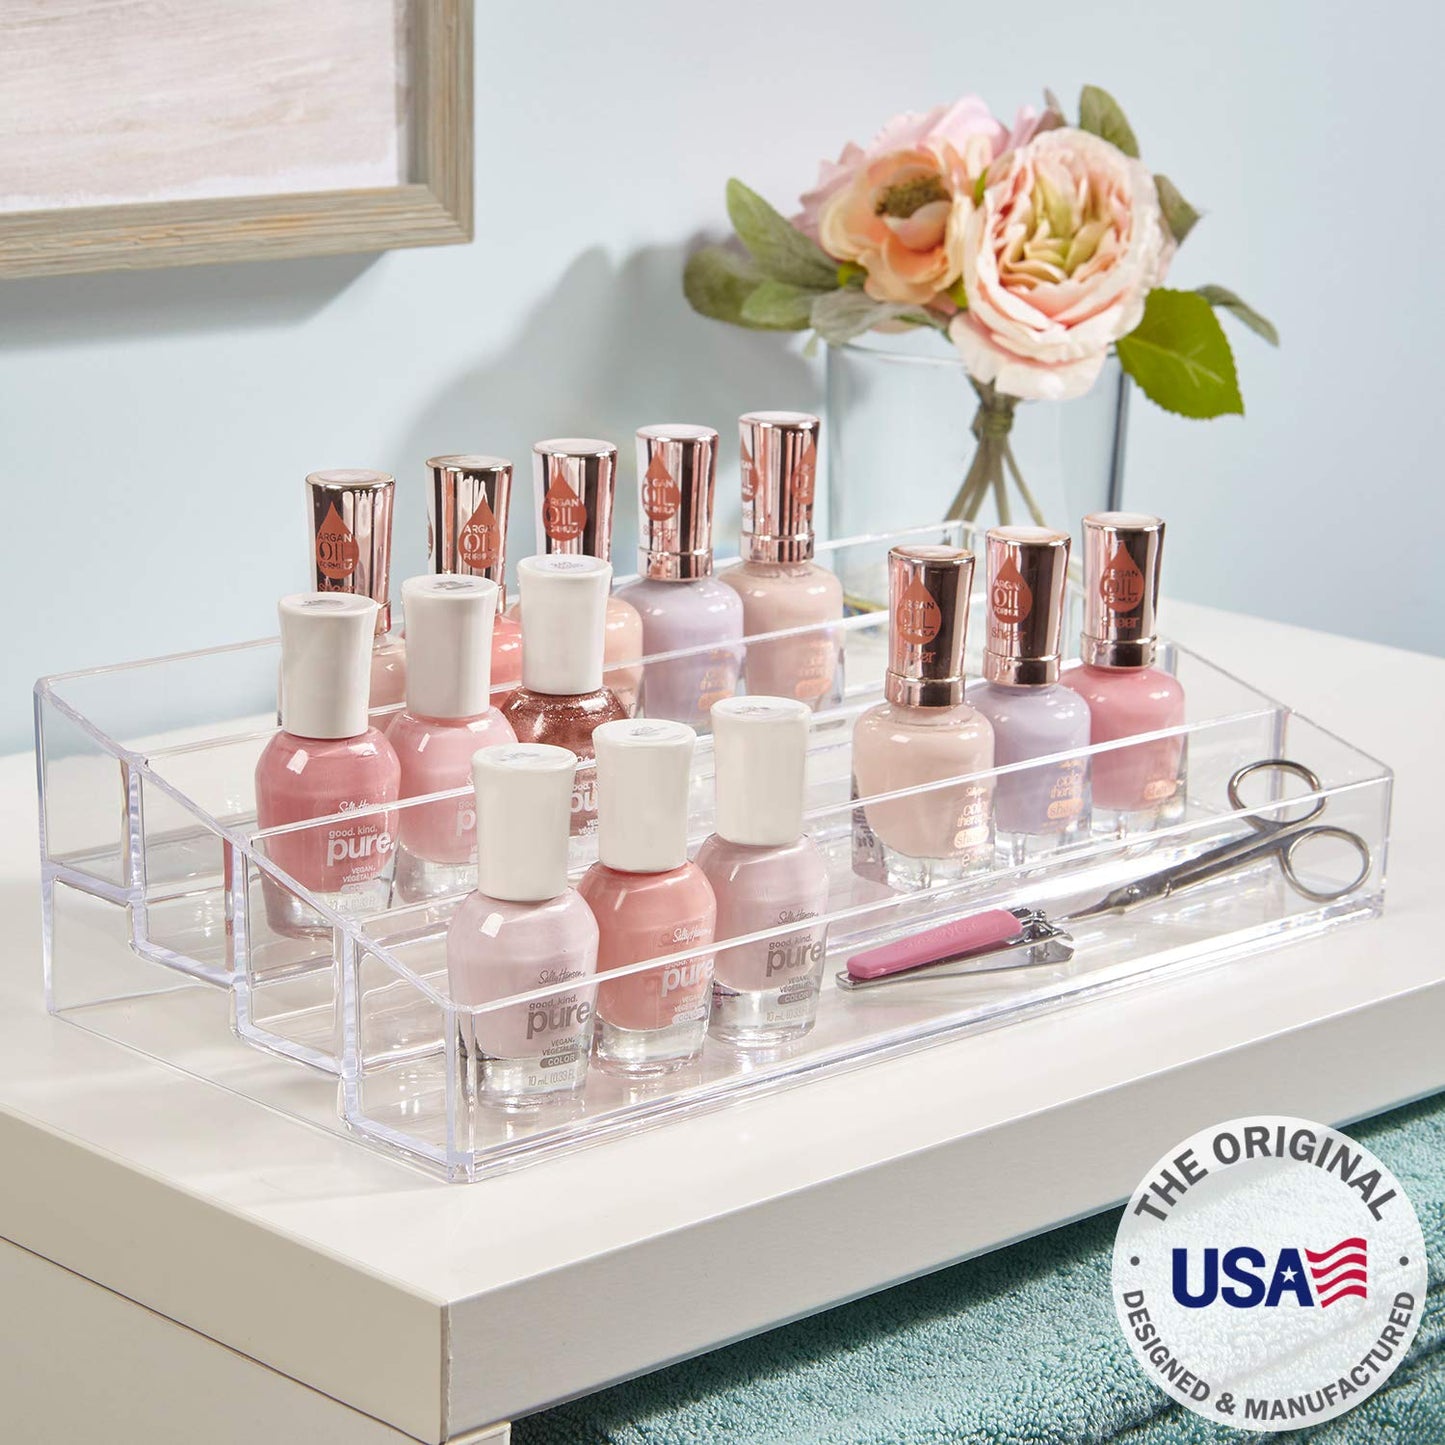 STORi Multi-Level Nail Polish Bottle Holder | Clear Plastic Organizer Rack for up to 40 Nail Polish Bottles, Rectangular 4 Tiered Vanity Display Stand for Makeup and Eyeshadow Palettes | Made in USA